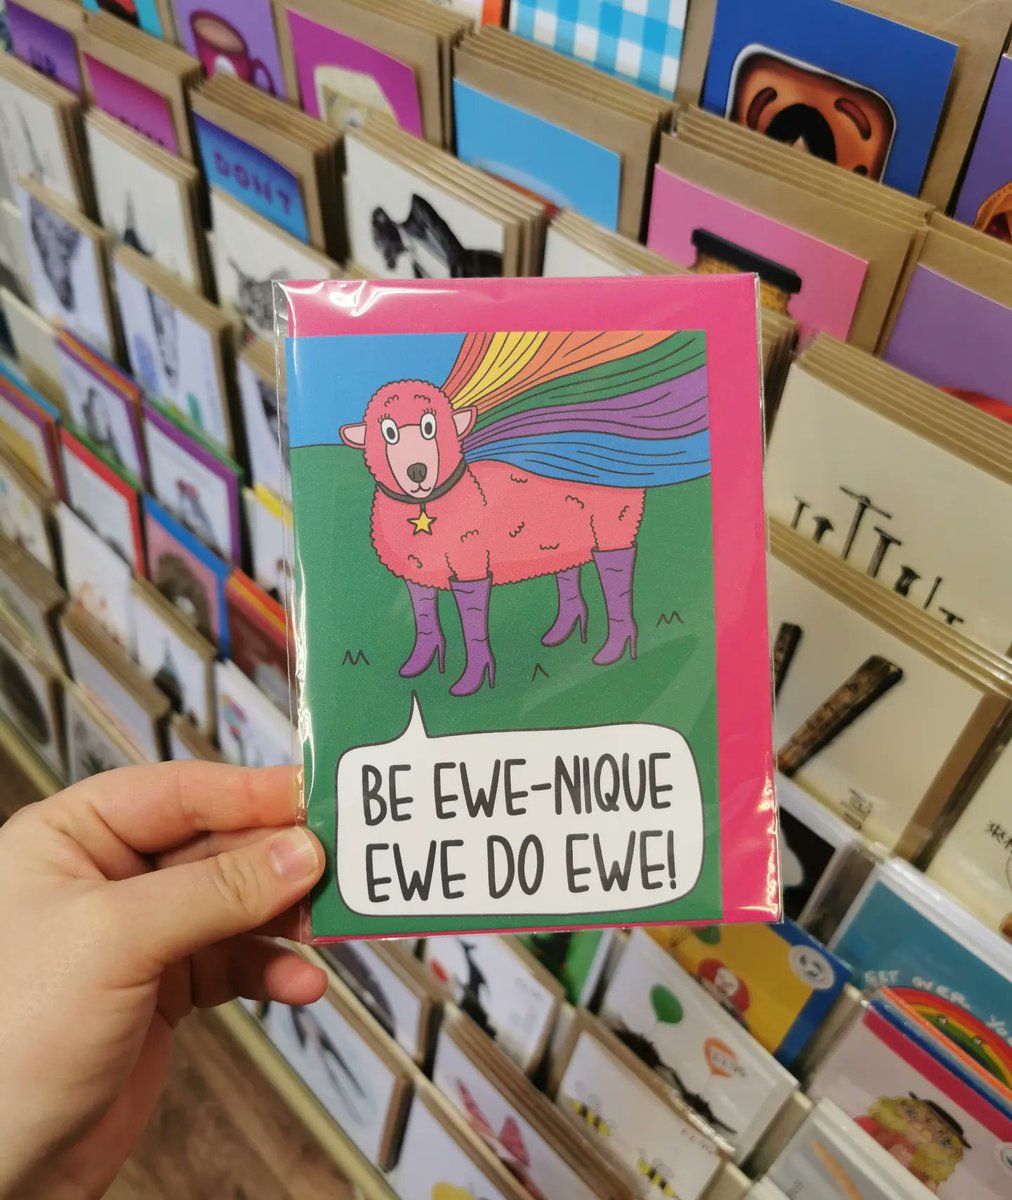 Ewe do Ewe! 😍😍😍

When we say we stock the best cards we are not lying!

We LOVE this beautiful and fun card from @teepeecreations 🧡

Open today until 6pm 🙌

P.s We are also unboxing some new stock today so keep your eyes peeled on our stories x

#2ndfloorchester #chester